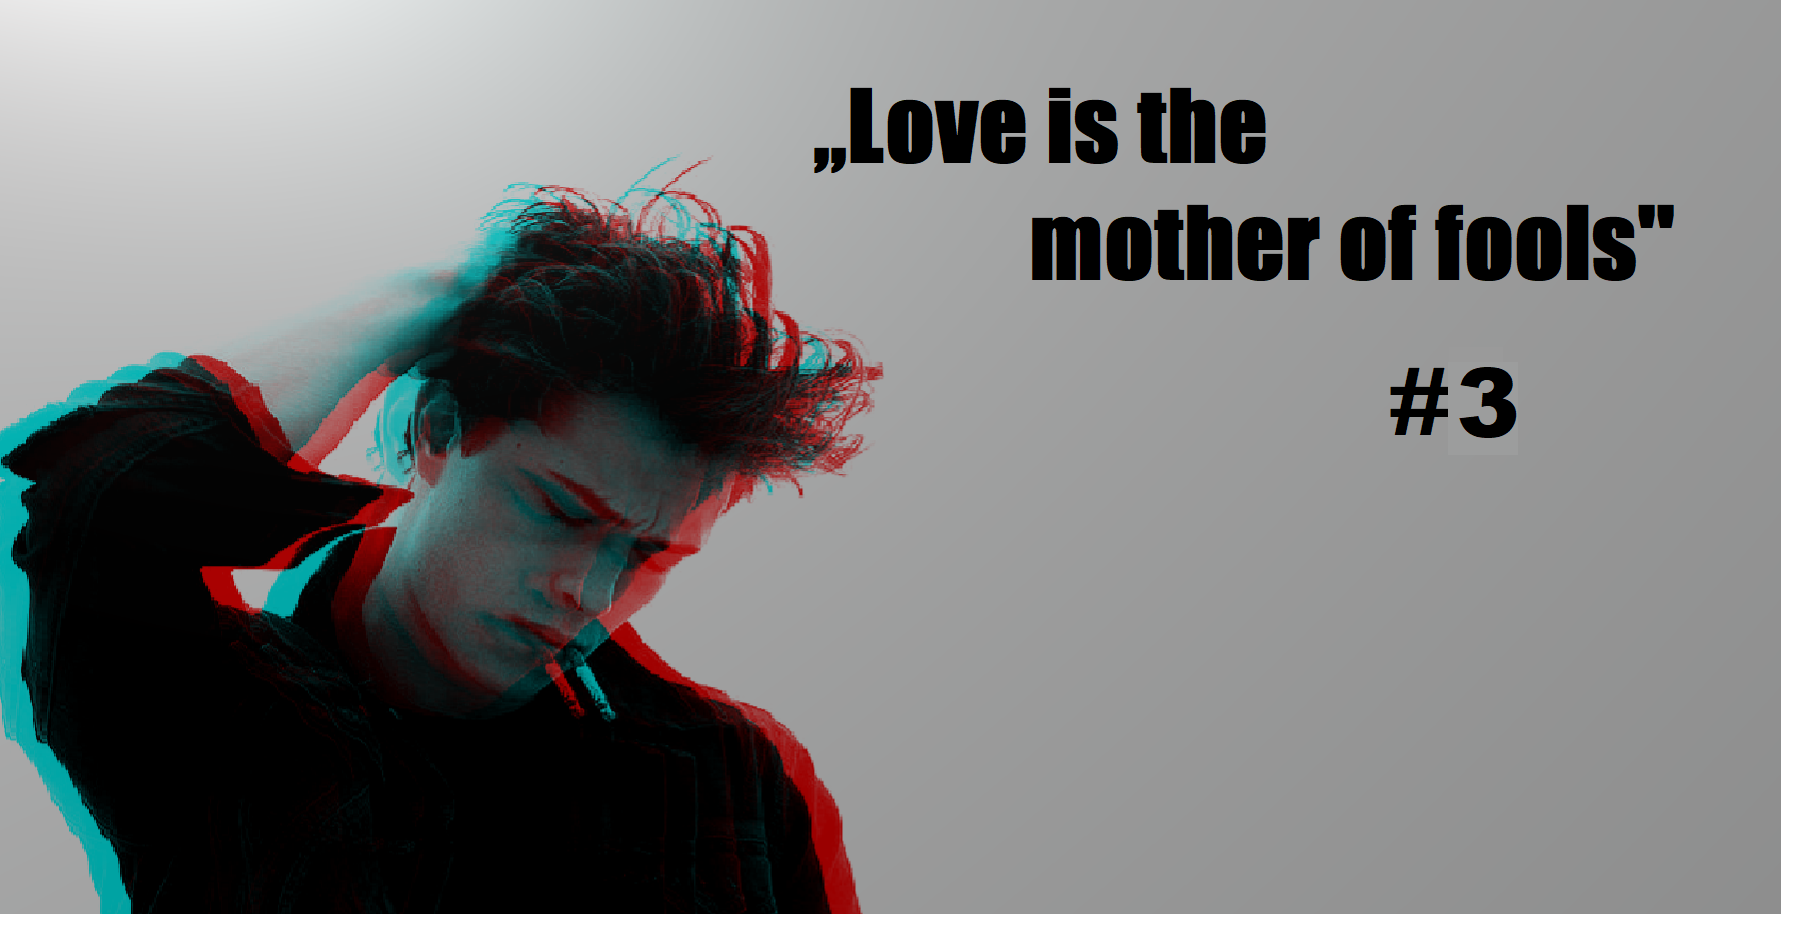 ,,Love is the mother of fools”#4